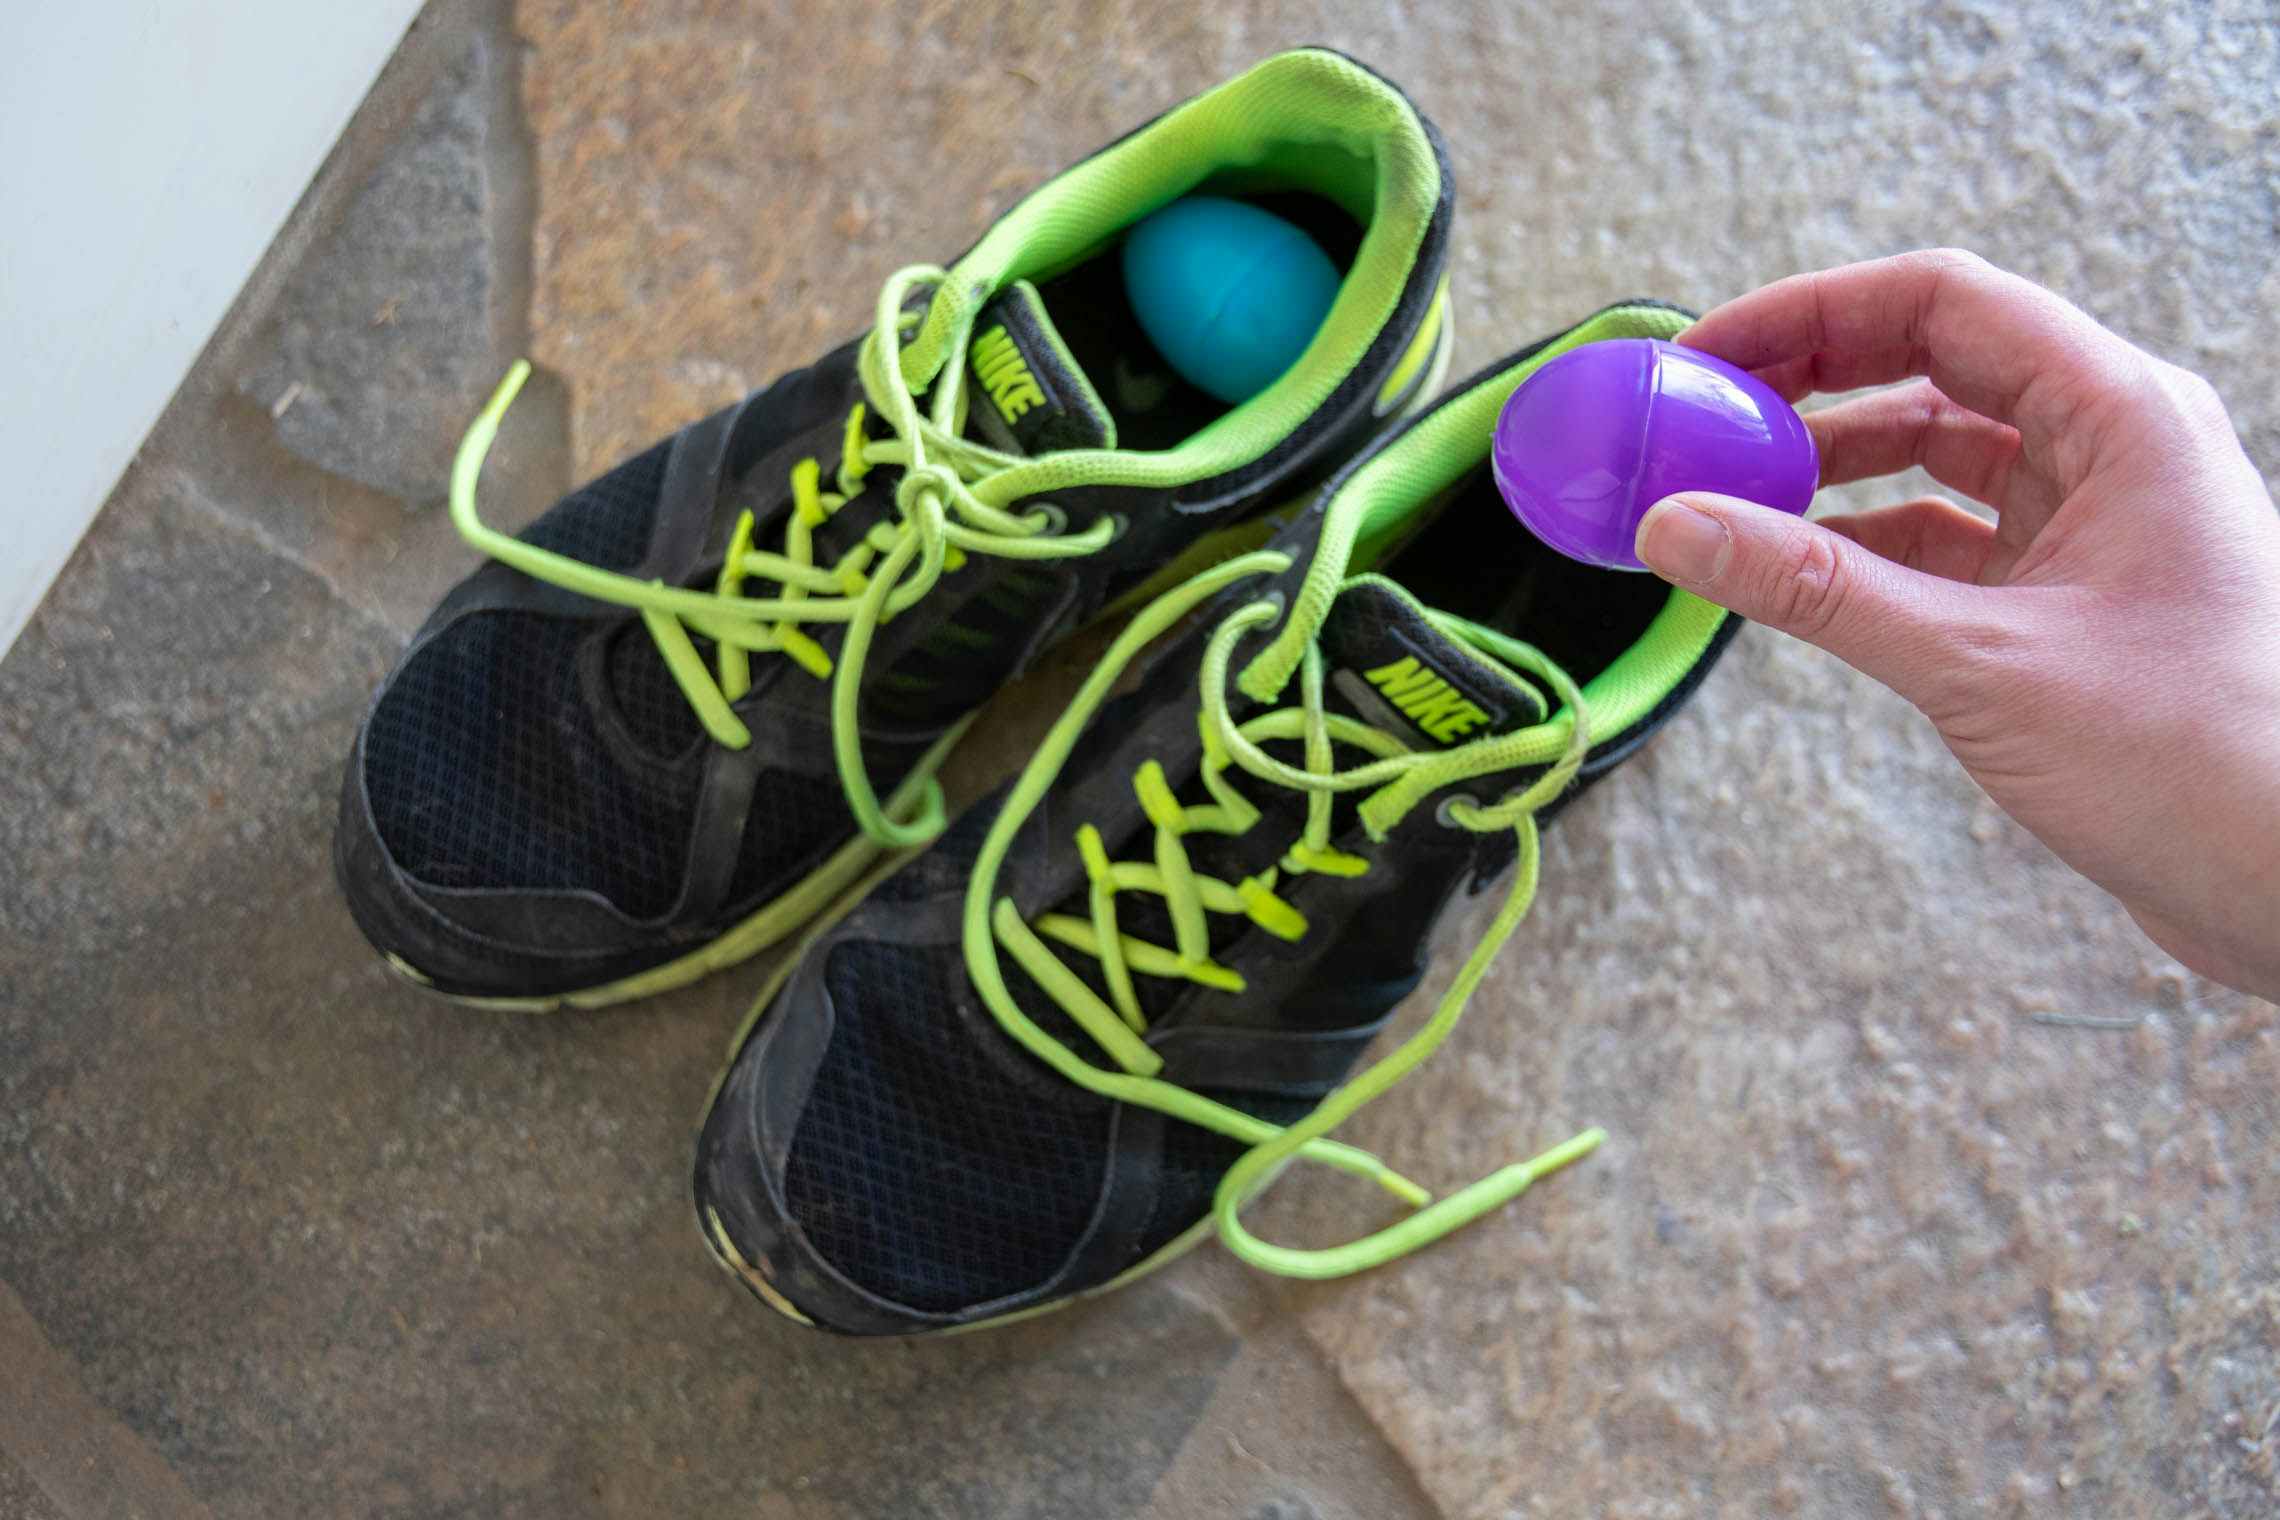 Running shoes with two plastic Easter eggs inside them.